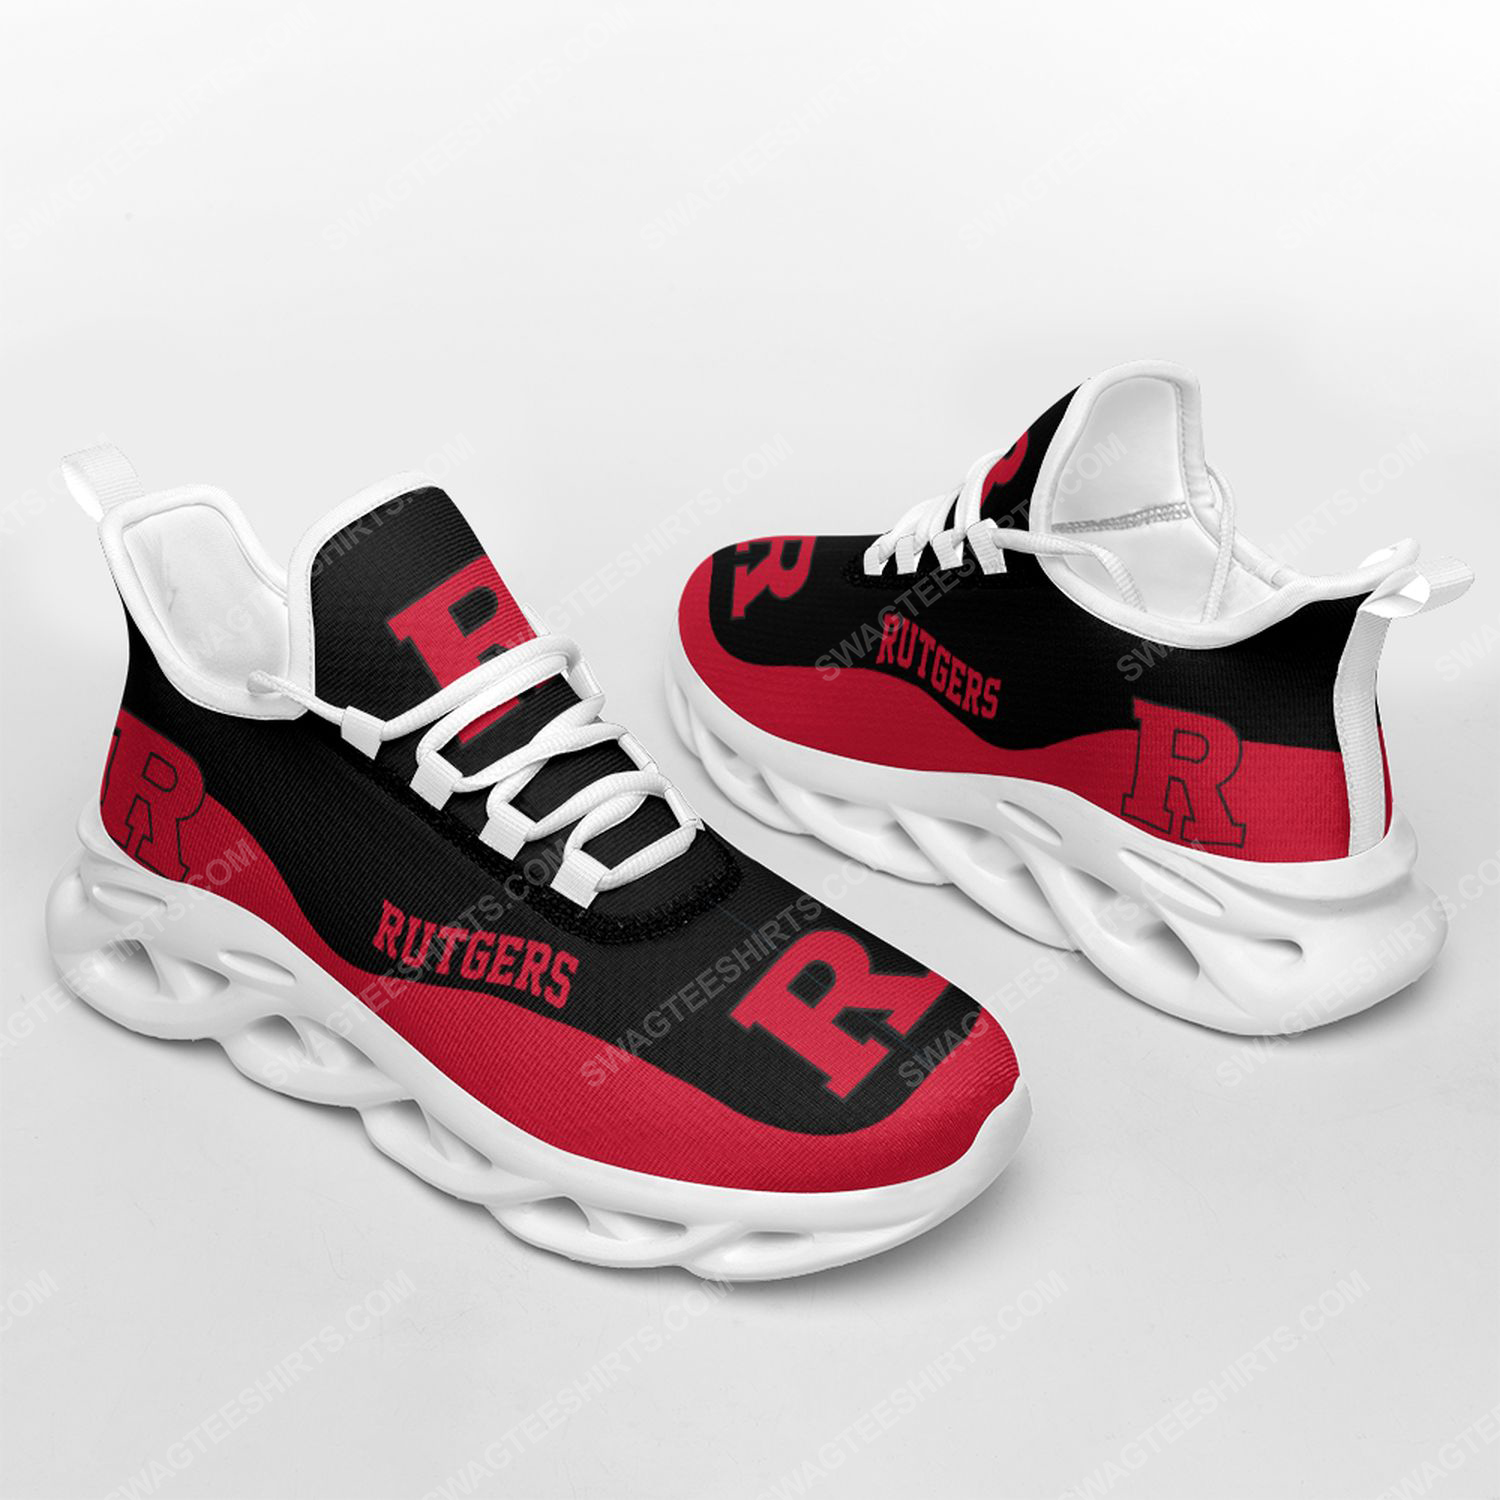 Rutgers scarlet knights football team max soul shoes 2